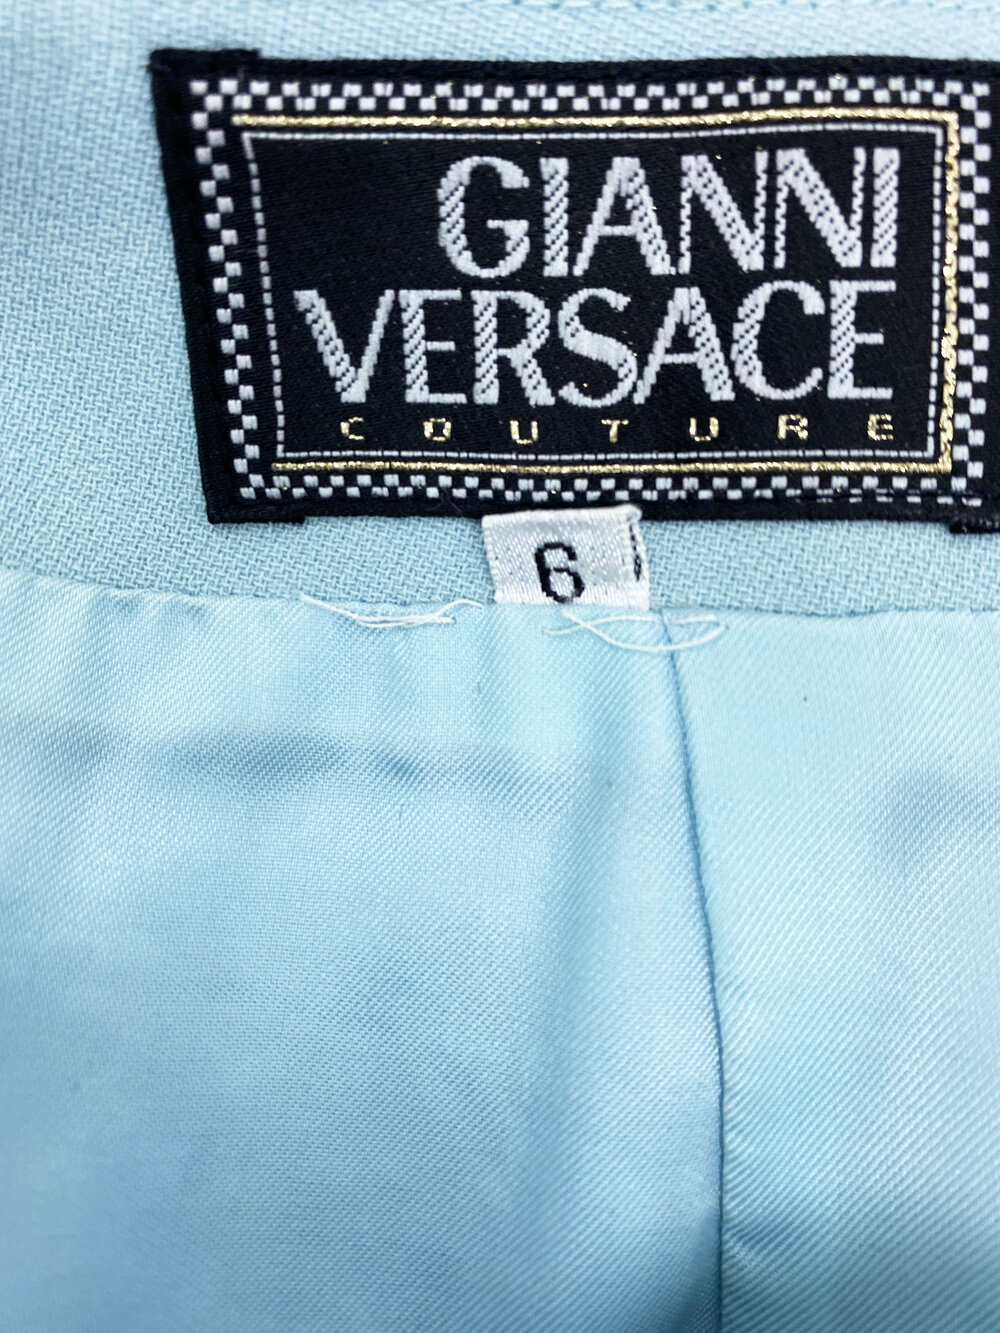 Gianni Versace F/W 1994 baby blue skirt suit — JAMES VELORIA